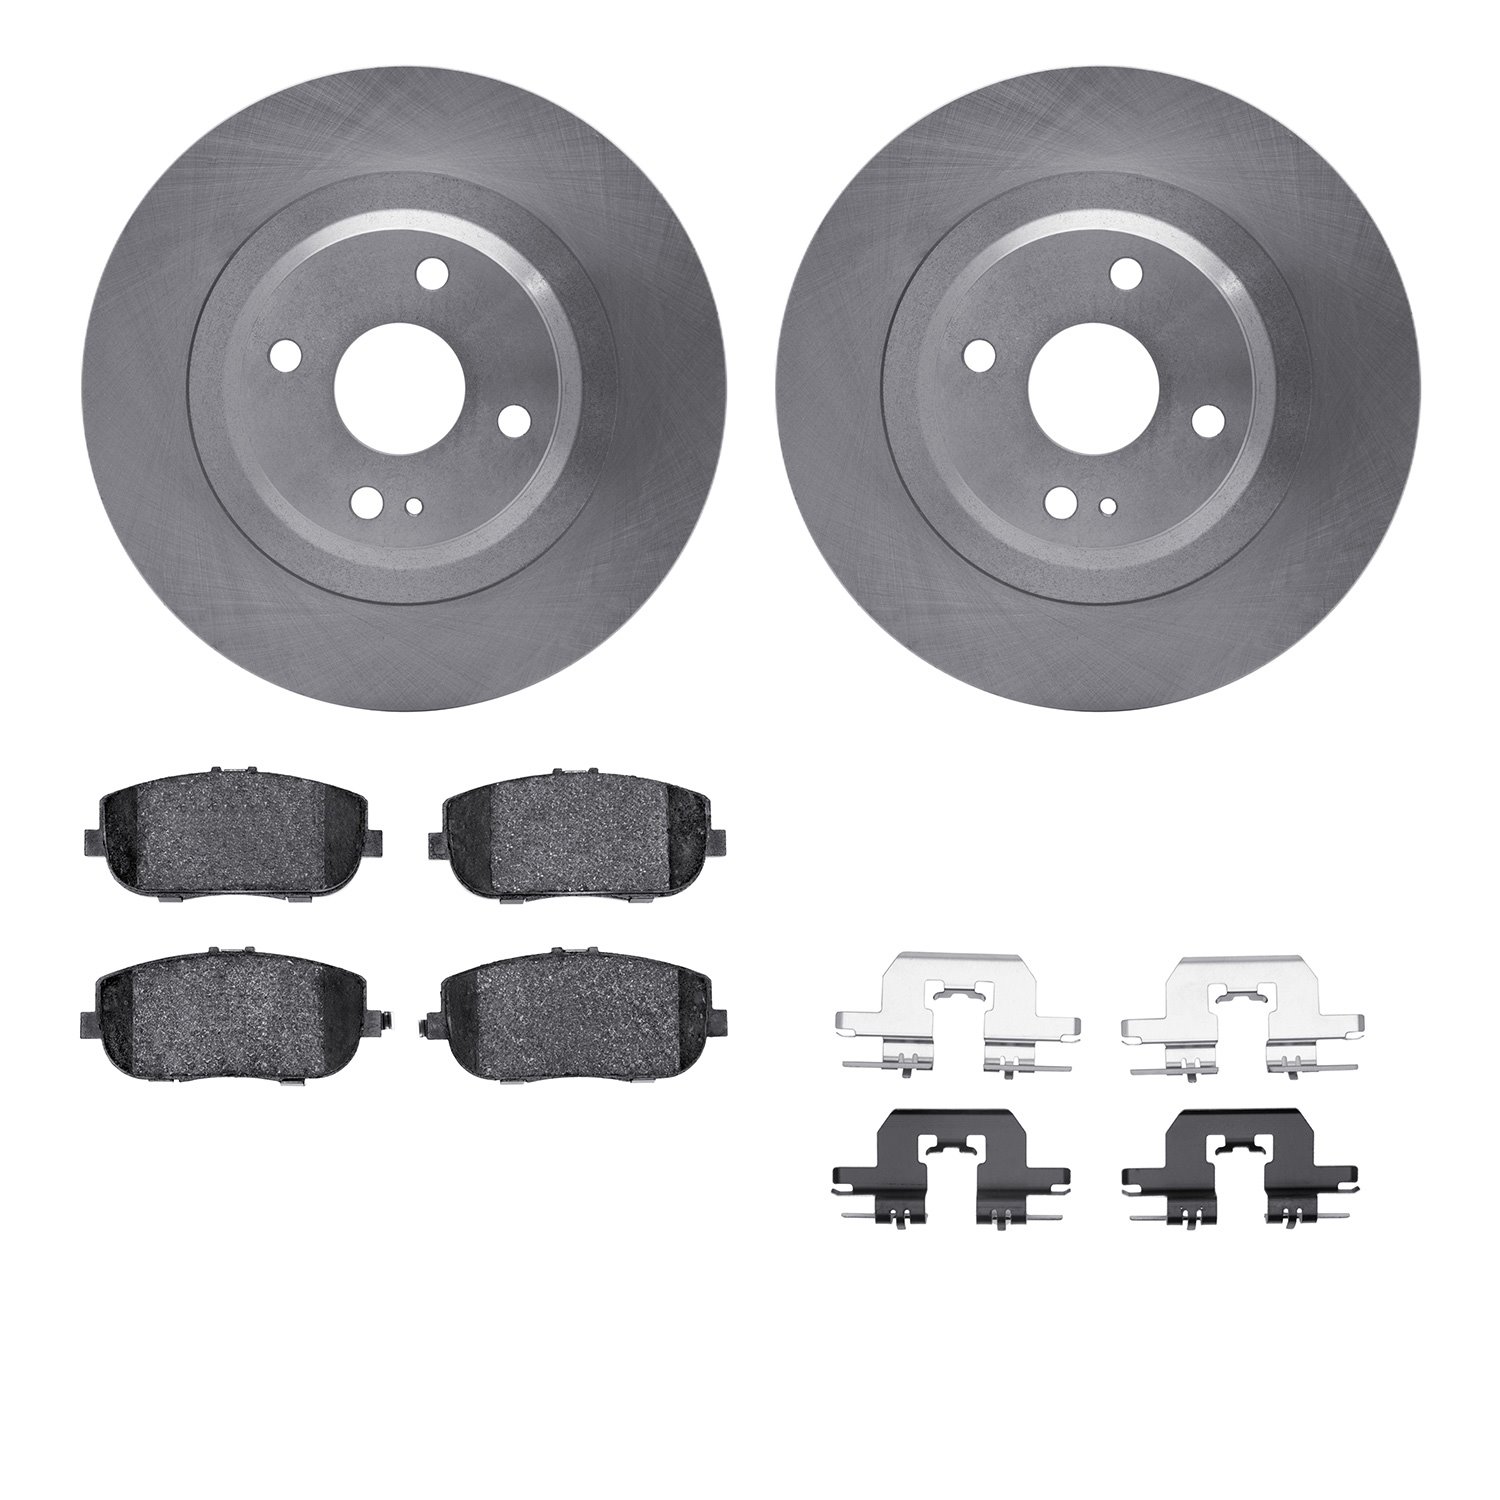 6312-80064 Brake Rotors with 3000-Series Ceramic Brake Pads Kit with Hardware, Fits Select Multiple Makes/Models, Position: Rear